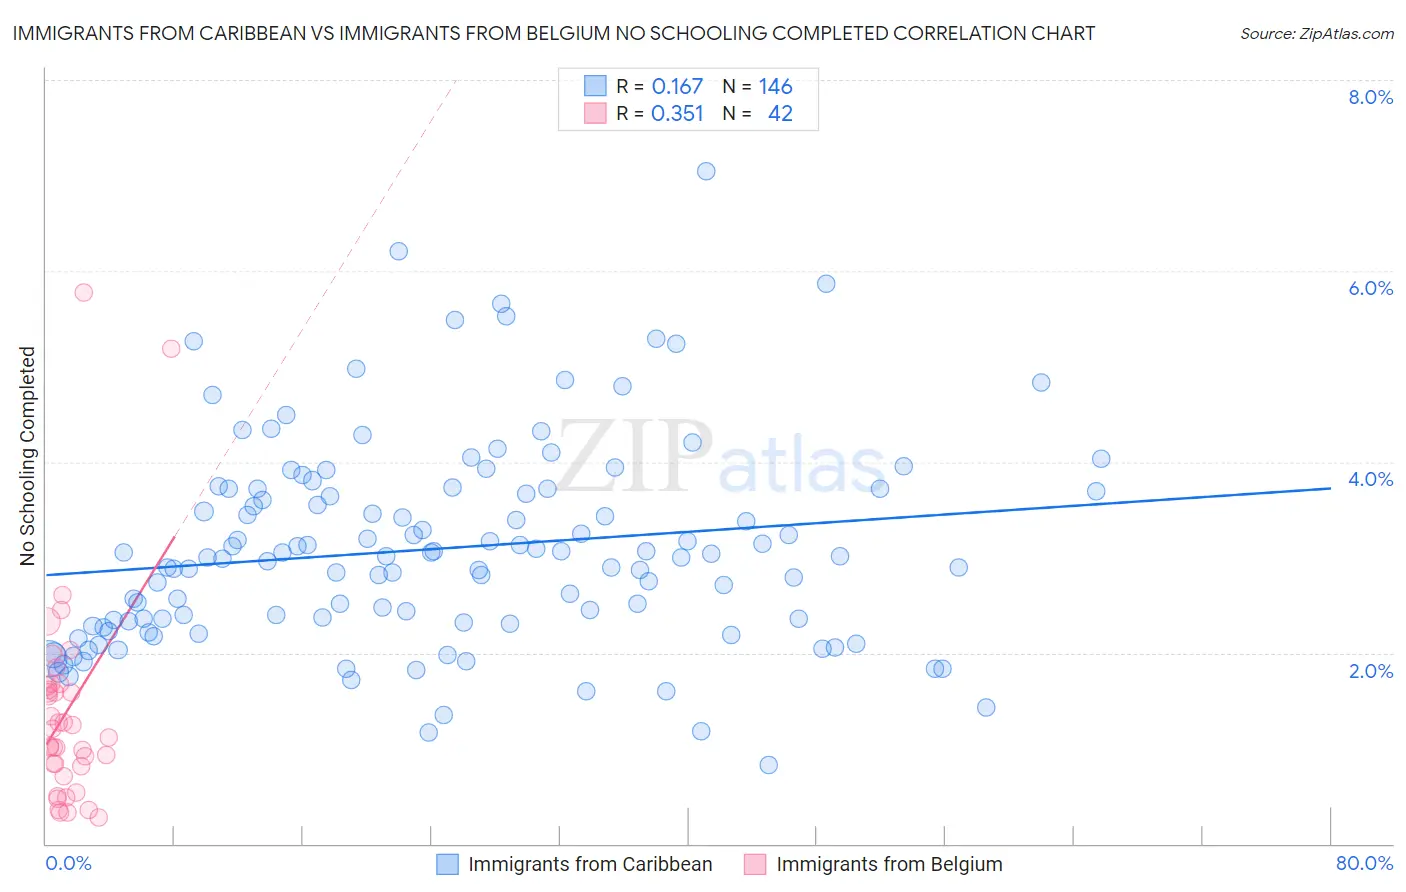 Immigrants from Caribbean vs Immigrants from Belgium No Schooling Completed